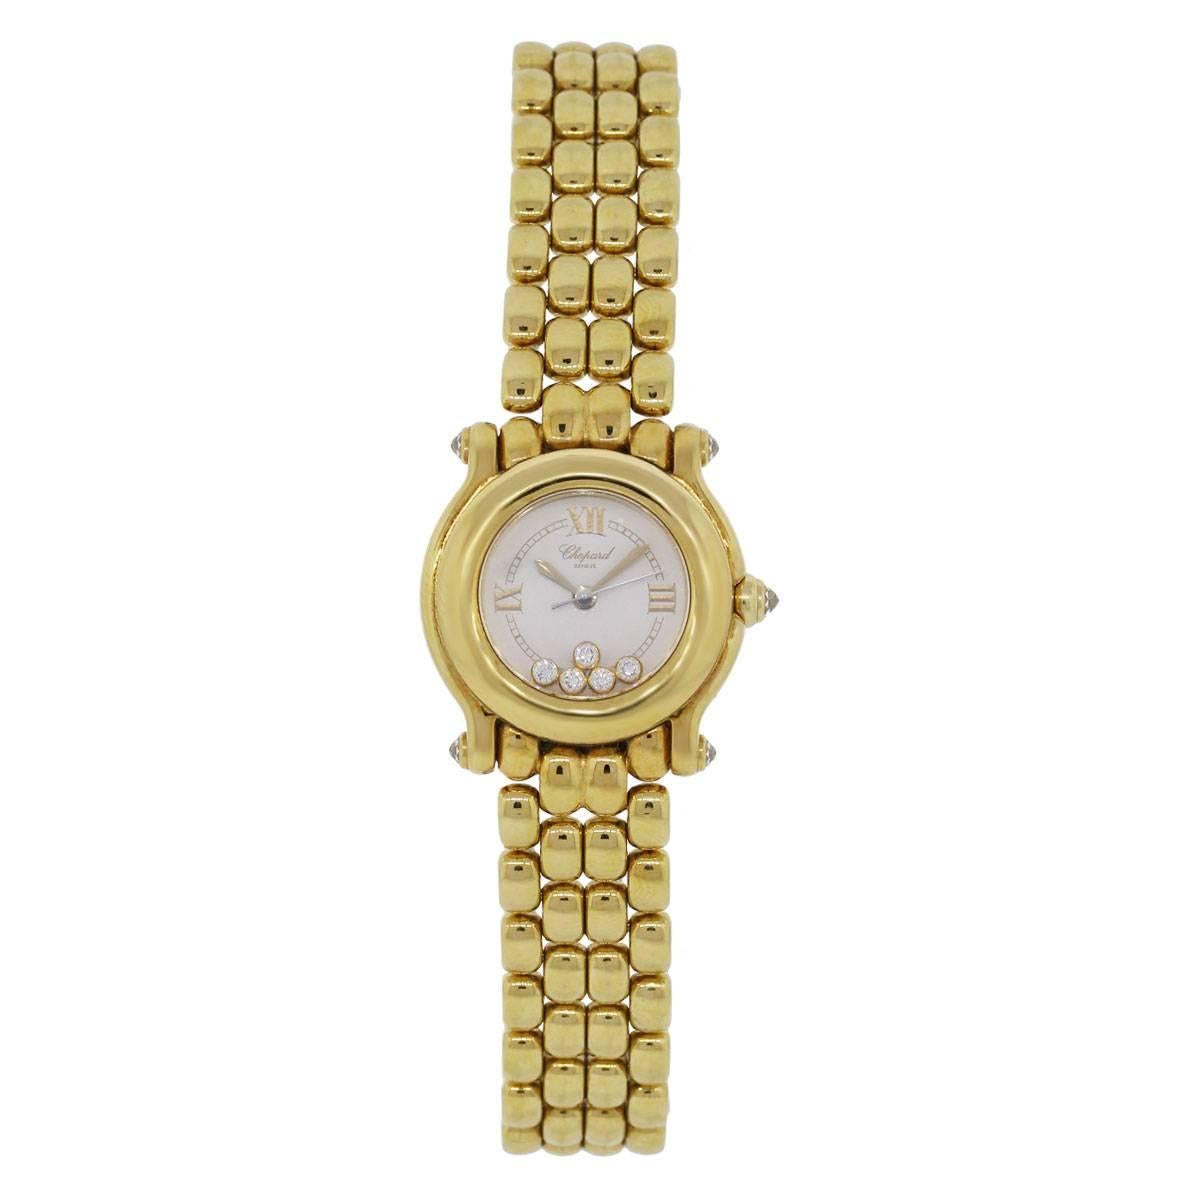 Brand: Chopard
Model: Happy Sport
MPN: 27/6150
Material: 18k Yellow Gold
Dial: White Roman Dial with floating diamonds.
Bezel: 18k Yellow Gold smooth fixed bezel.
Case Measurements: 26mm
Bracelet: 18k Yellow Gold
Clasp: Hidden Deployment
Movement: